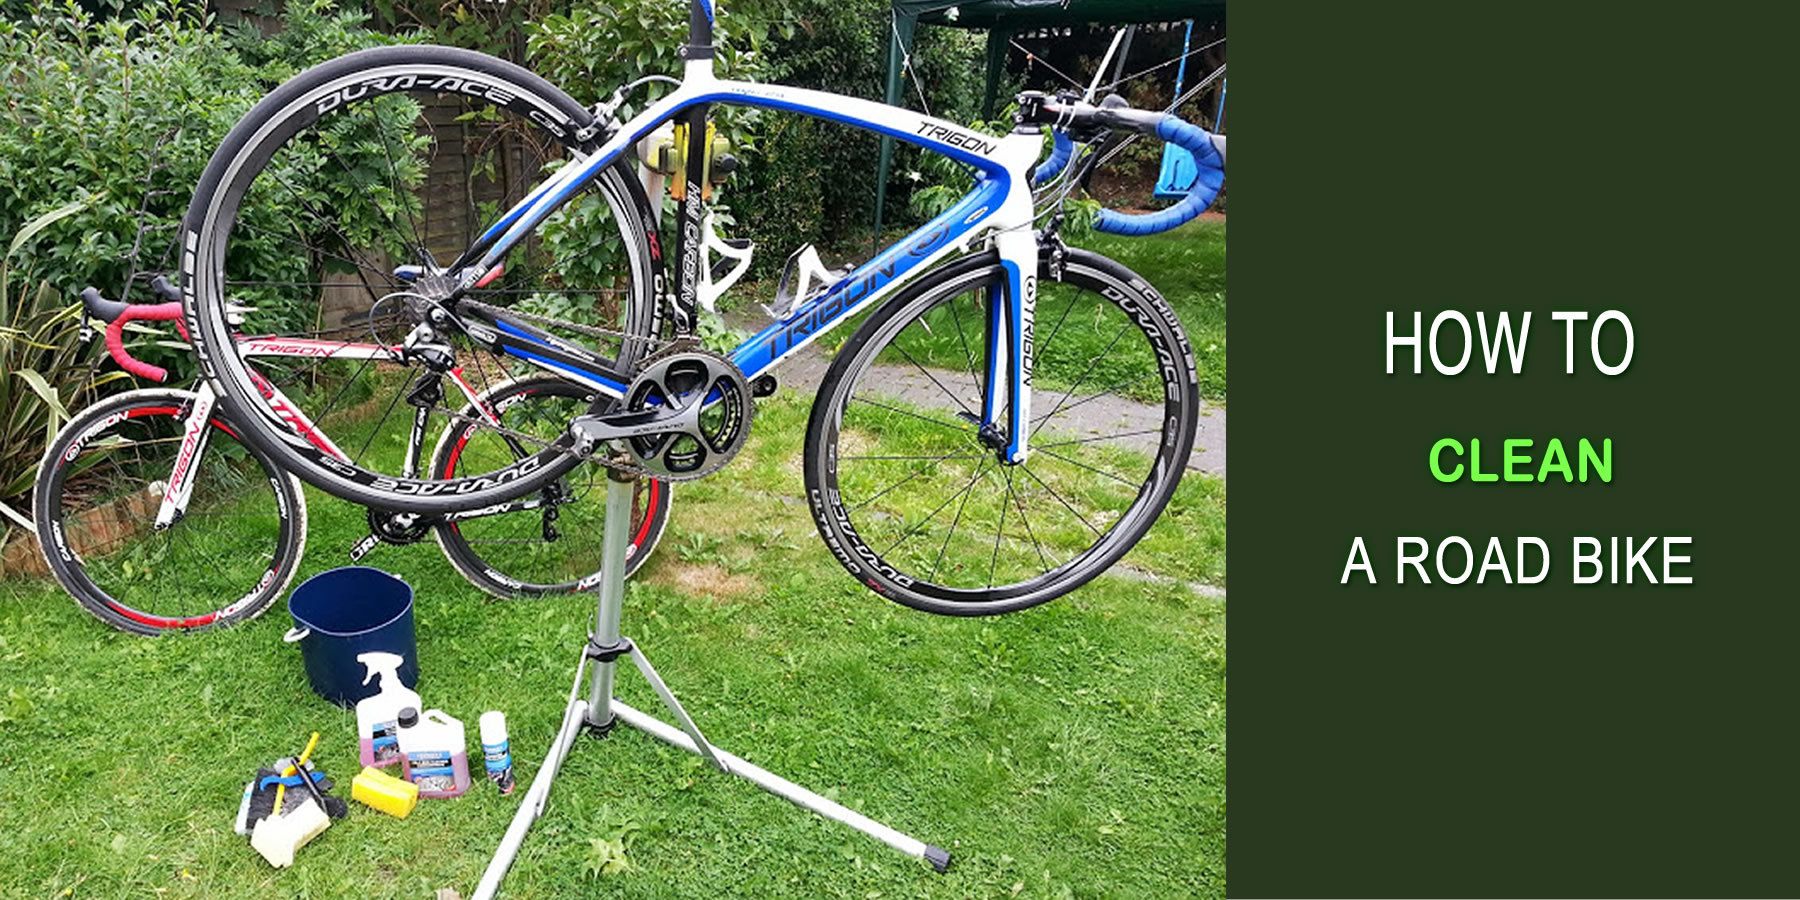 How To Clean A Road Bike – Guide From Expert Biker!